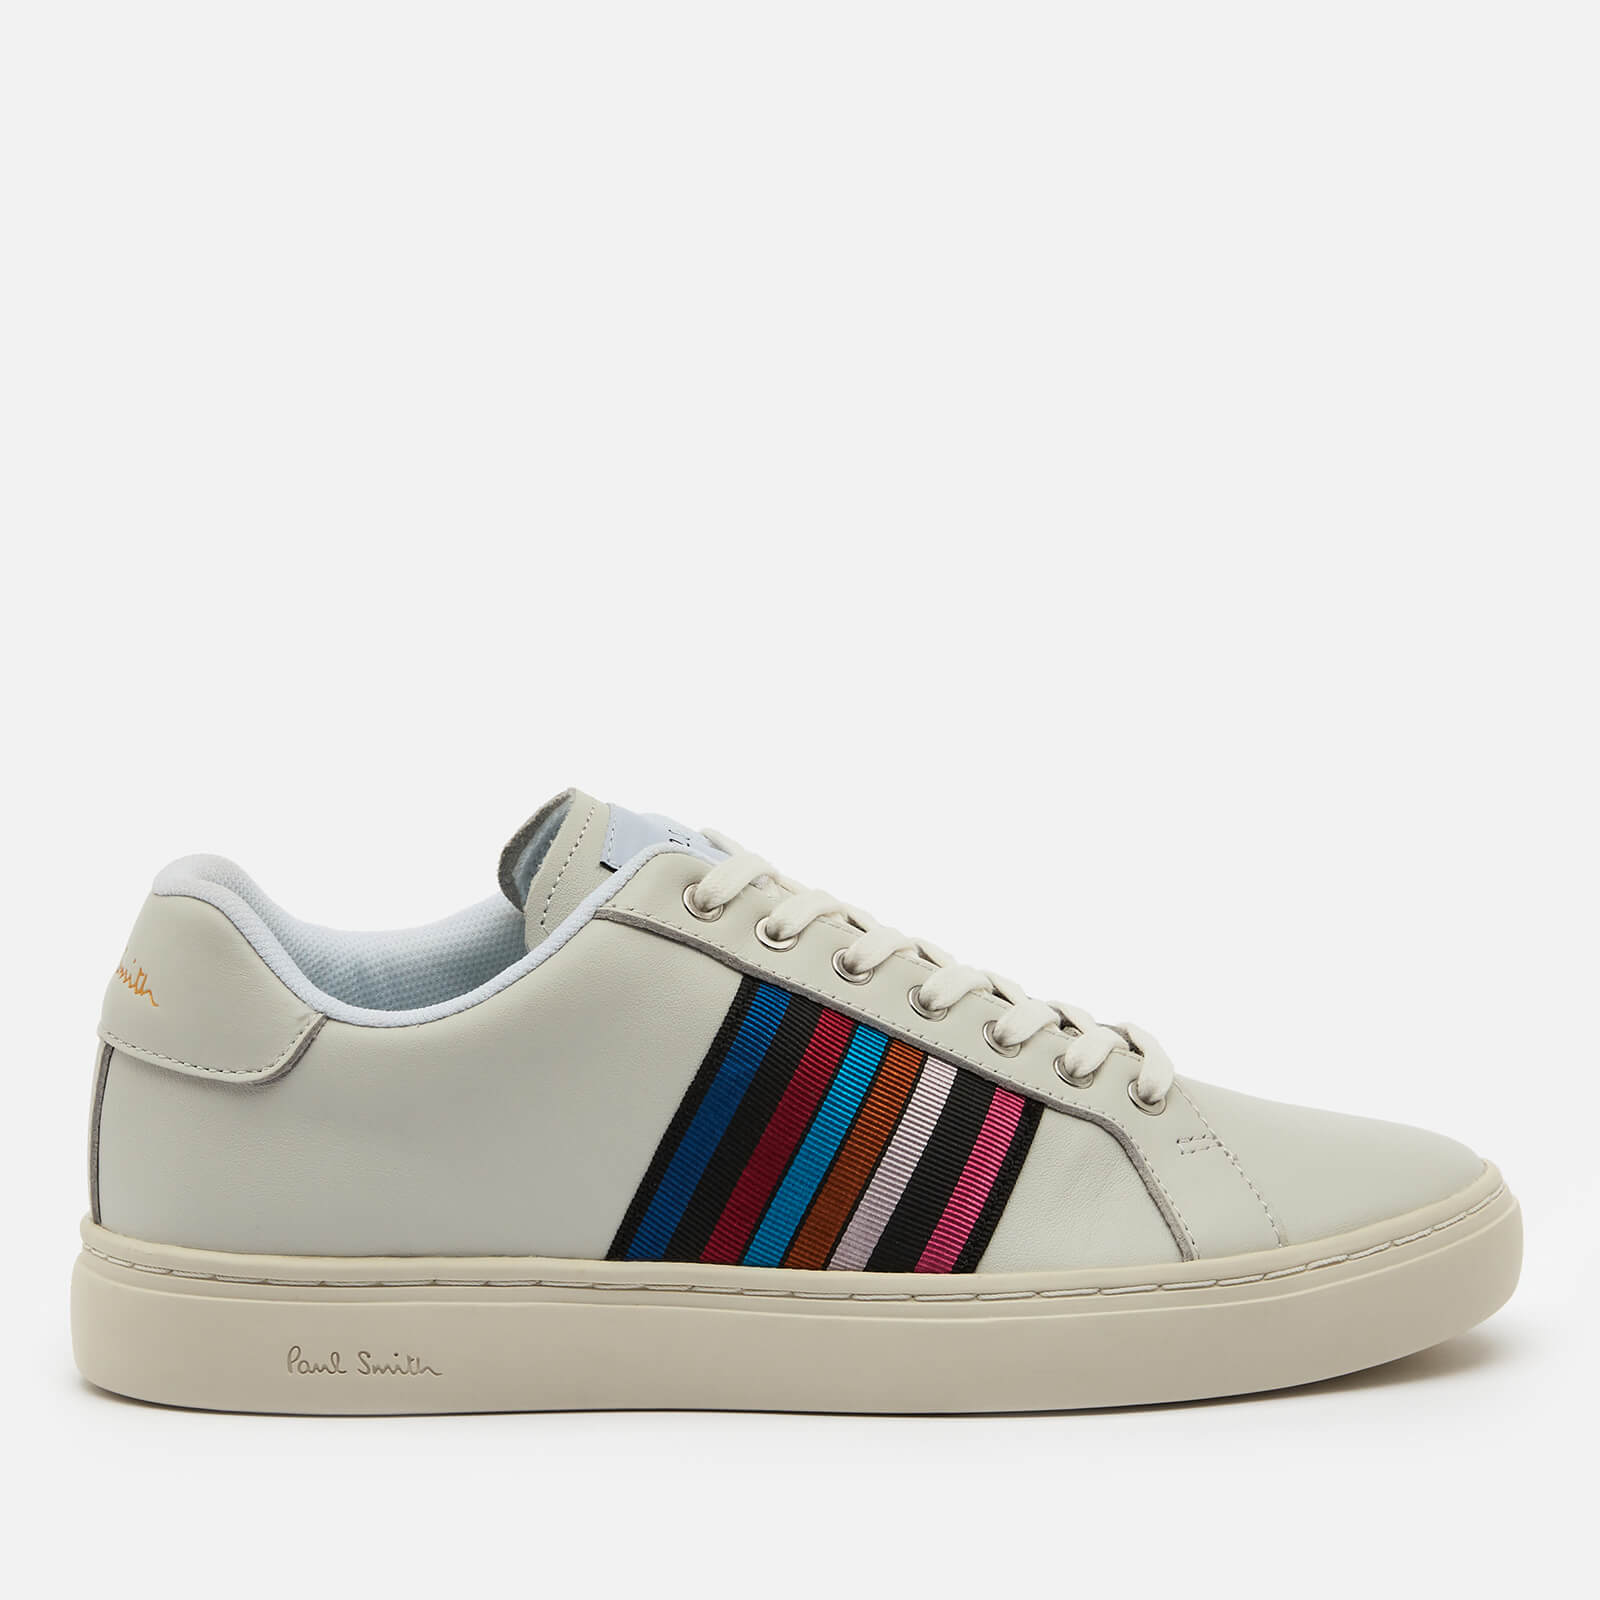 Paul Smith Women's Lapin Leather Cupsole Trainers - Off White/Multi Webbing - UK 3